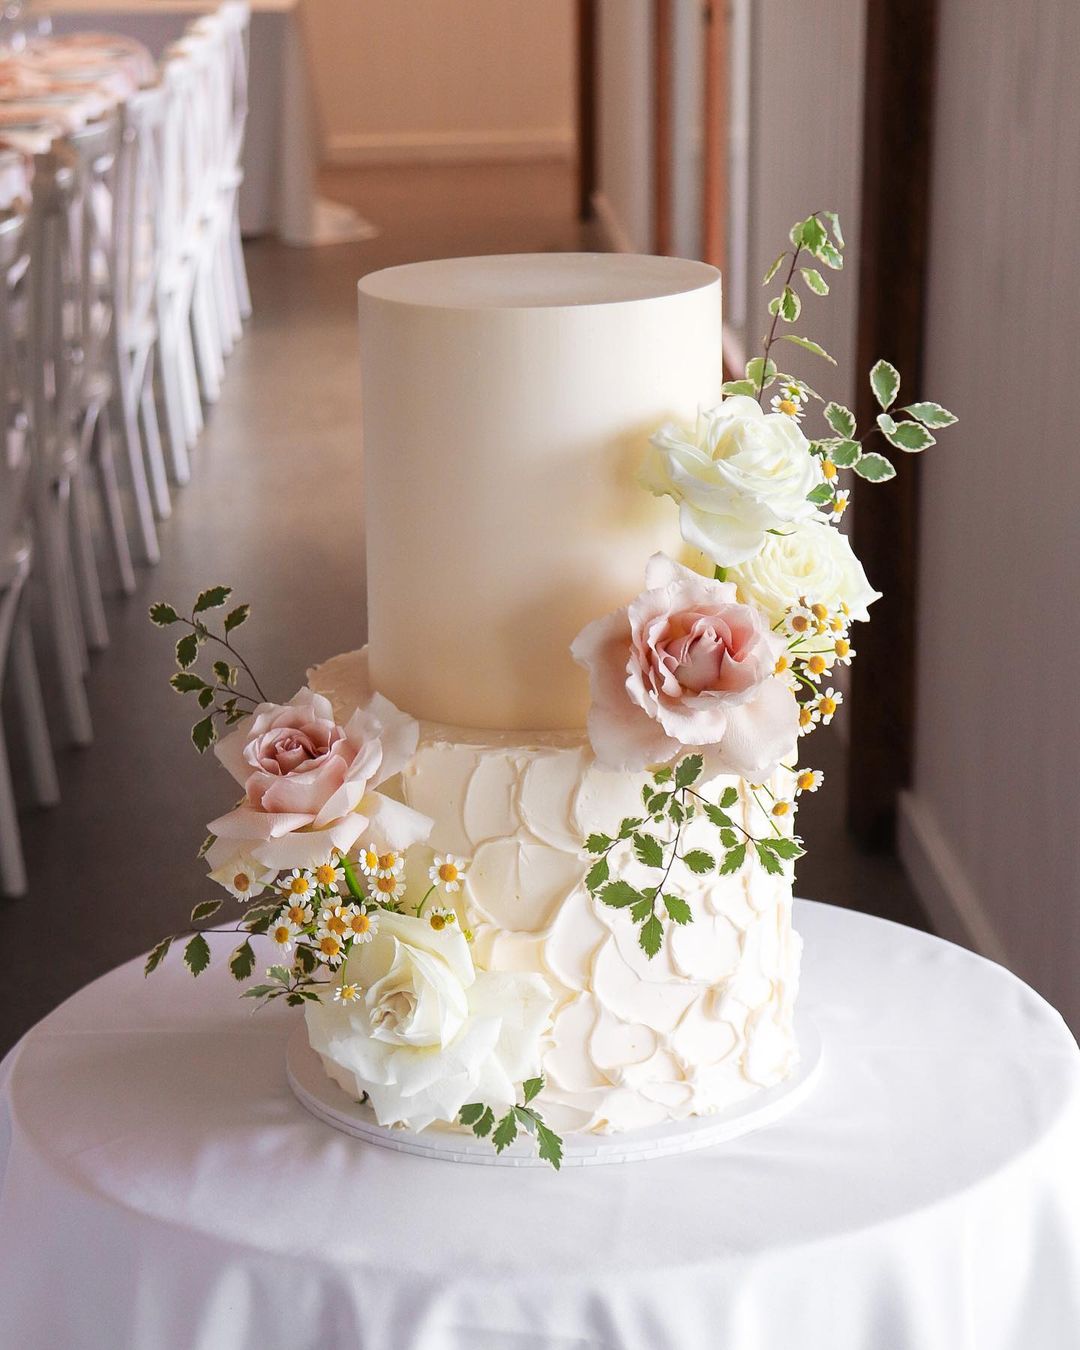 country wedding cake with wildflowers and pink roses via milkandhoney.cakecreative